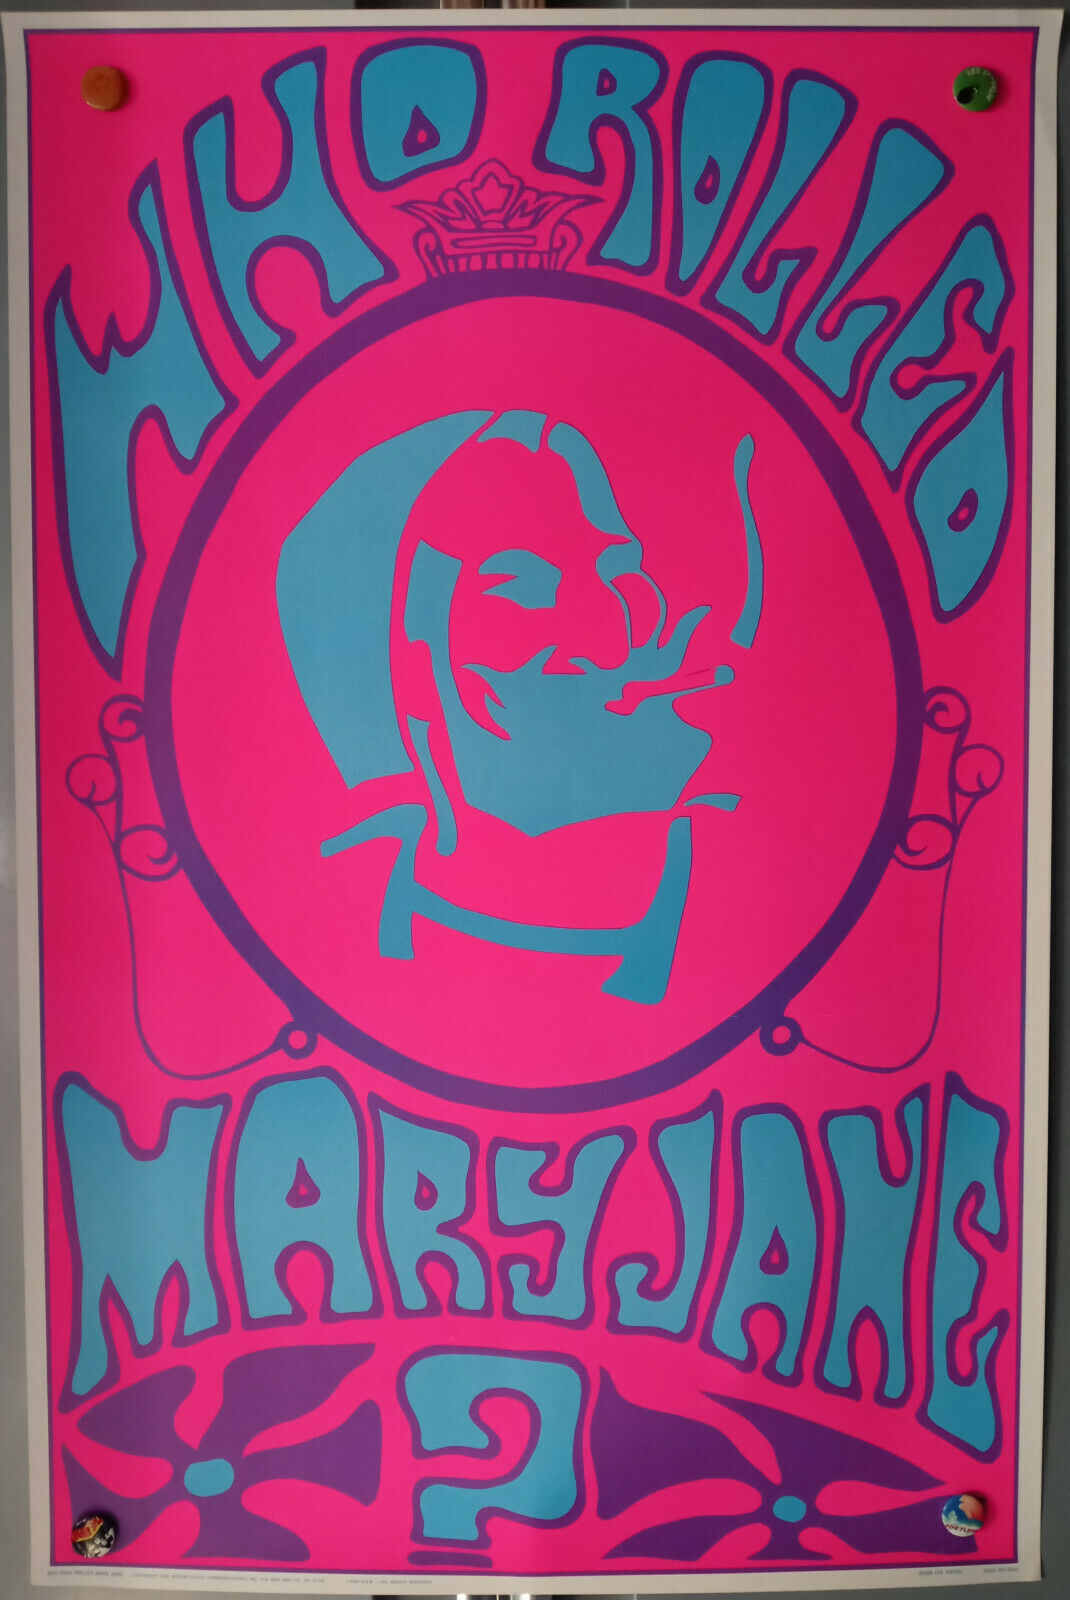 Who Rolled Mary Jane? 1969 Black Light Poster